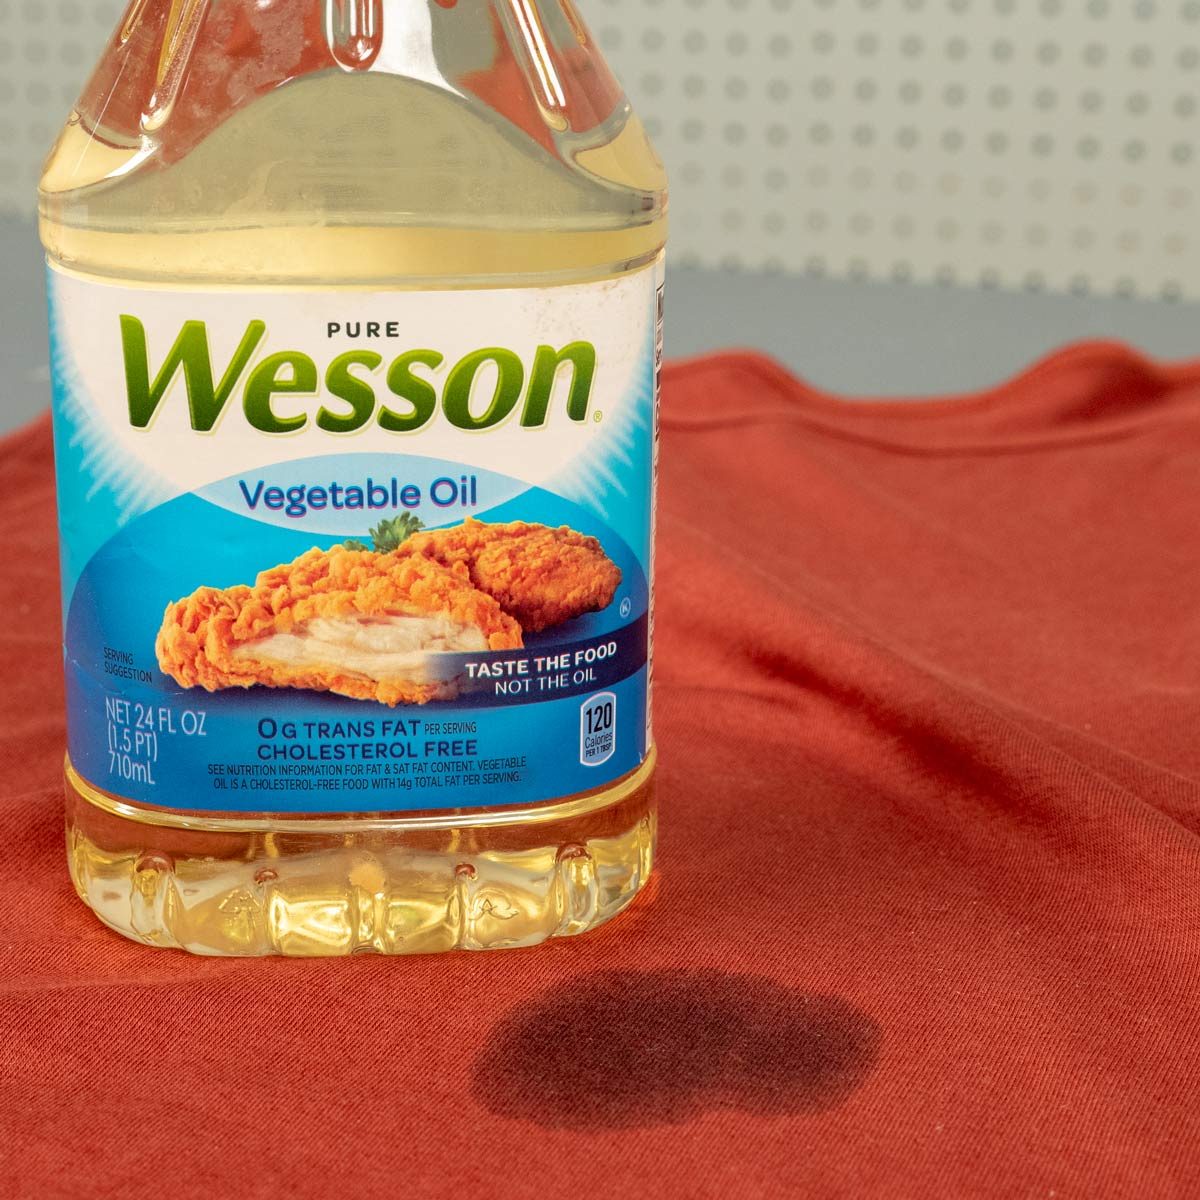 How to Get Oil Stains Out of Clothes